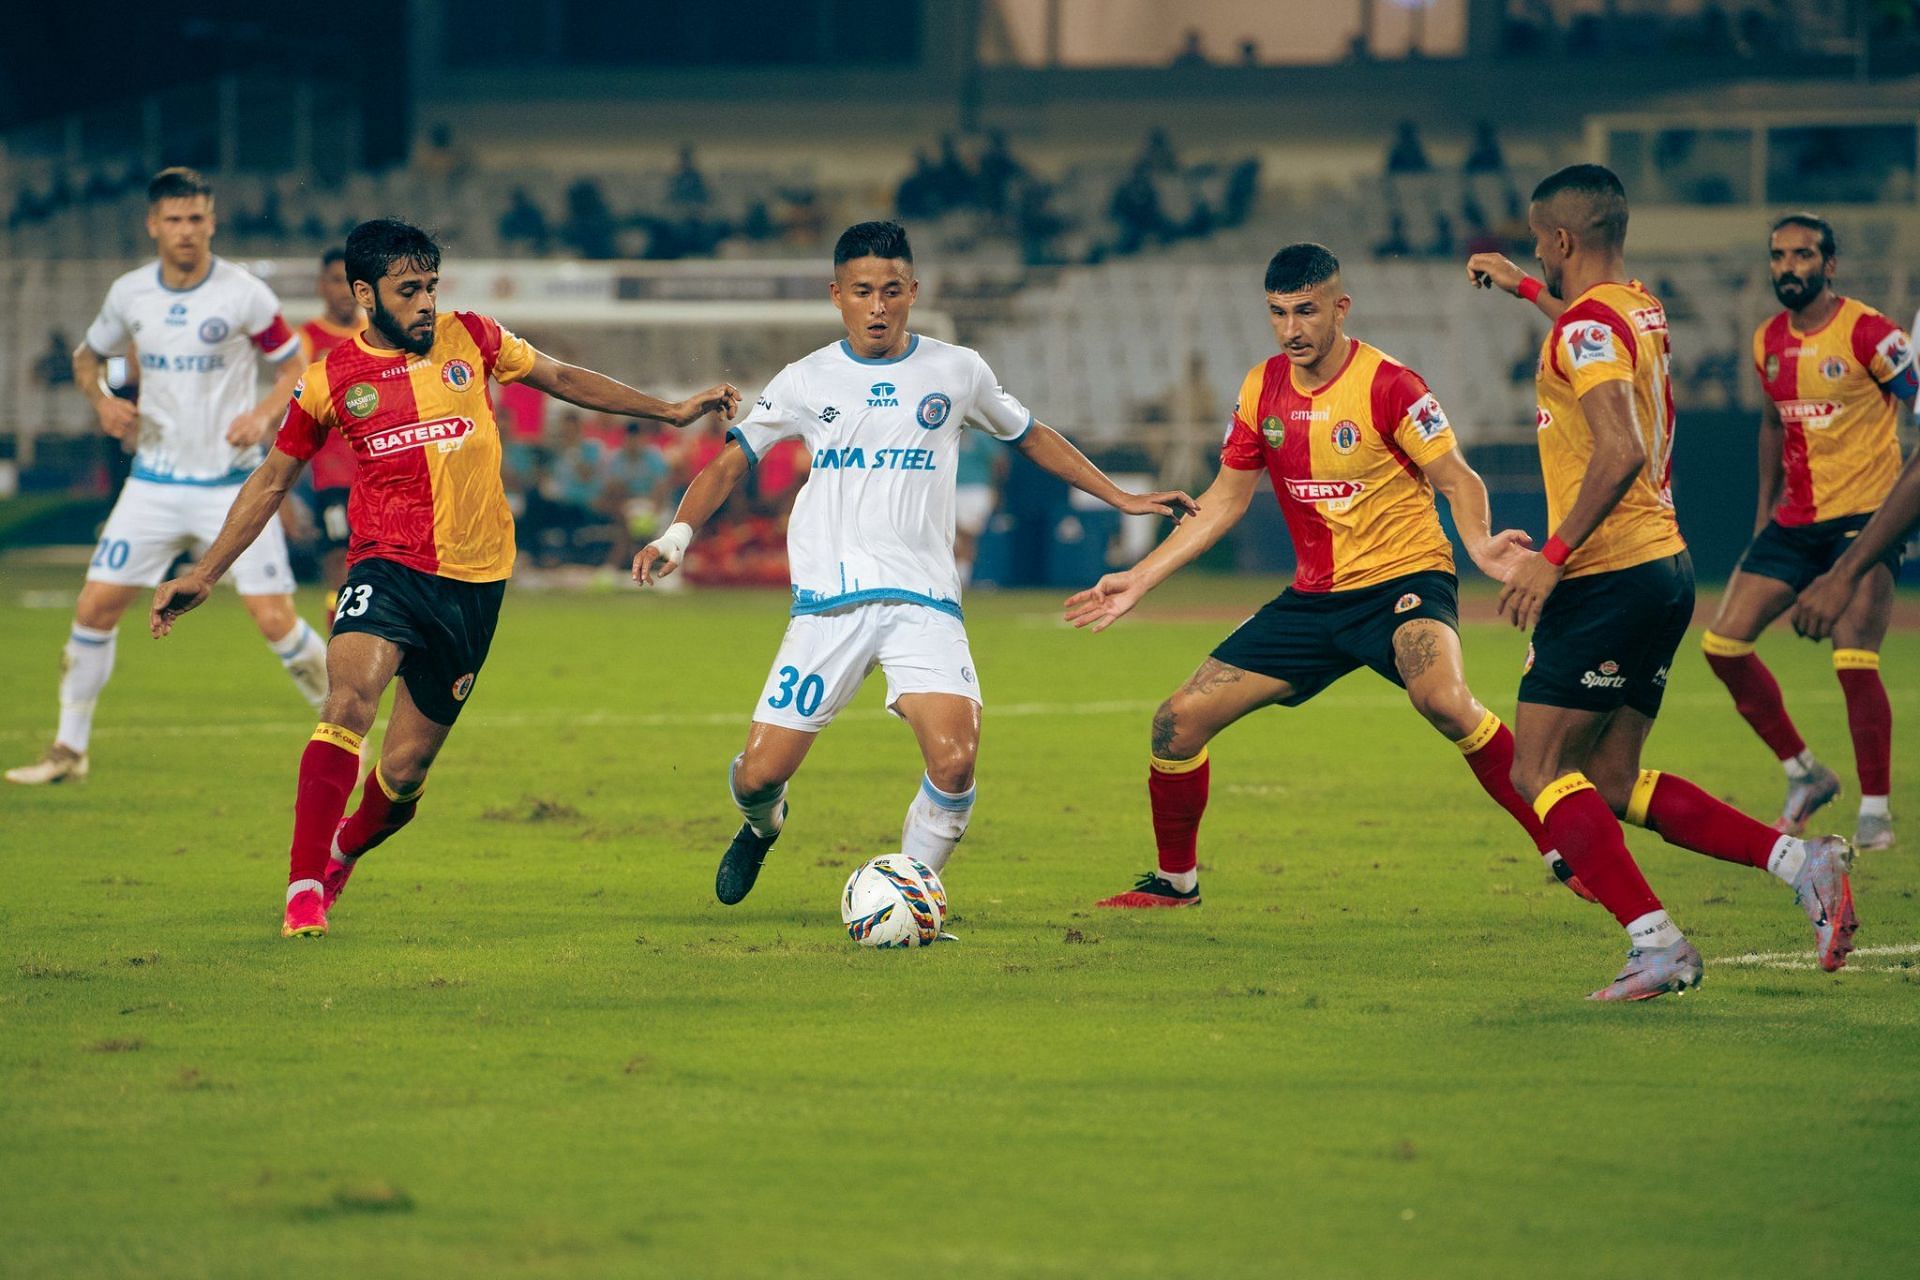 East Bengal FC created the better chances of the two teams.